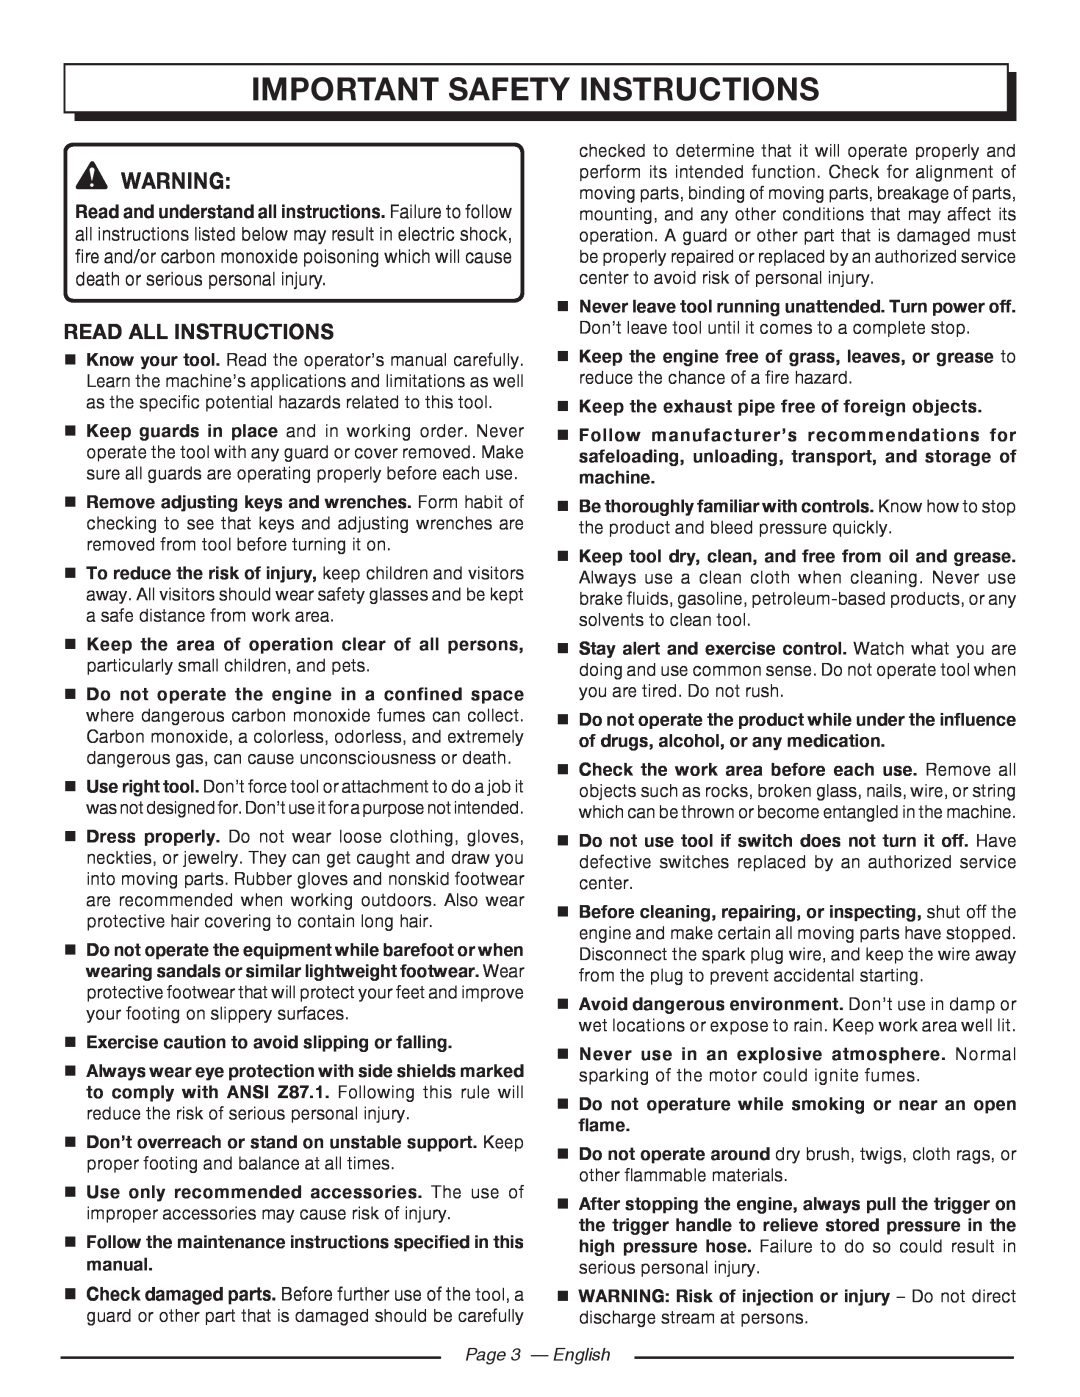 Homelite UT80993 Important Safety Instructions, Read All Instructions,  Exercise caution to avoid slipping or falling 